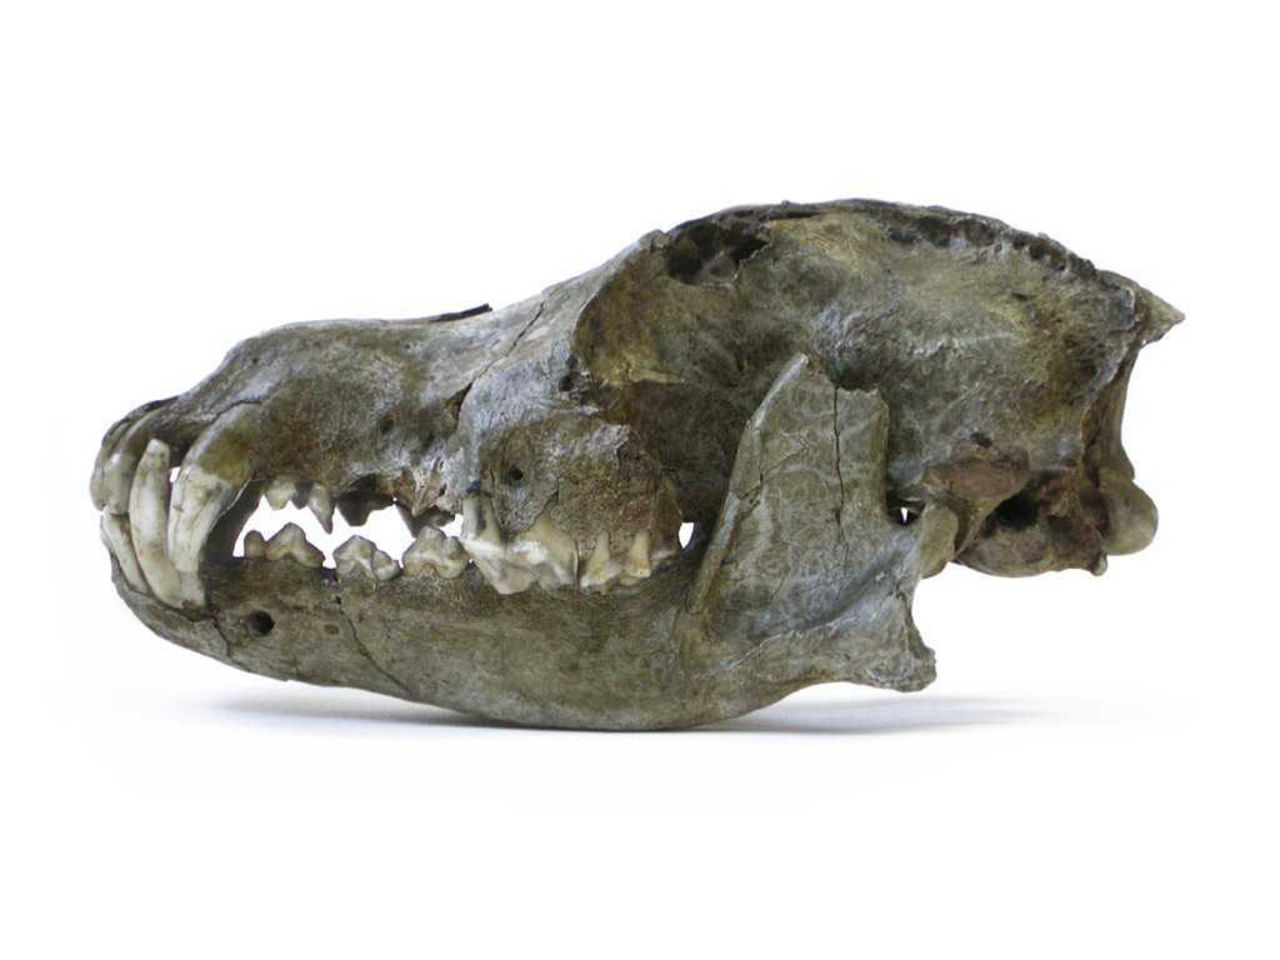 Scientists suggest in a new study that dogs were first domesticated in Europe many thousands of years ago. This is the head of a Pleistocene wolf from the Trou des Nutons cave in Belgium, estimated to be 26,000 years old. This was a particularly large wolf species.